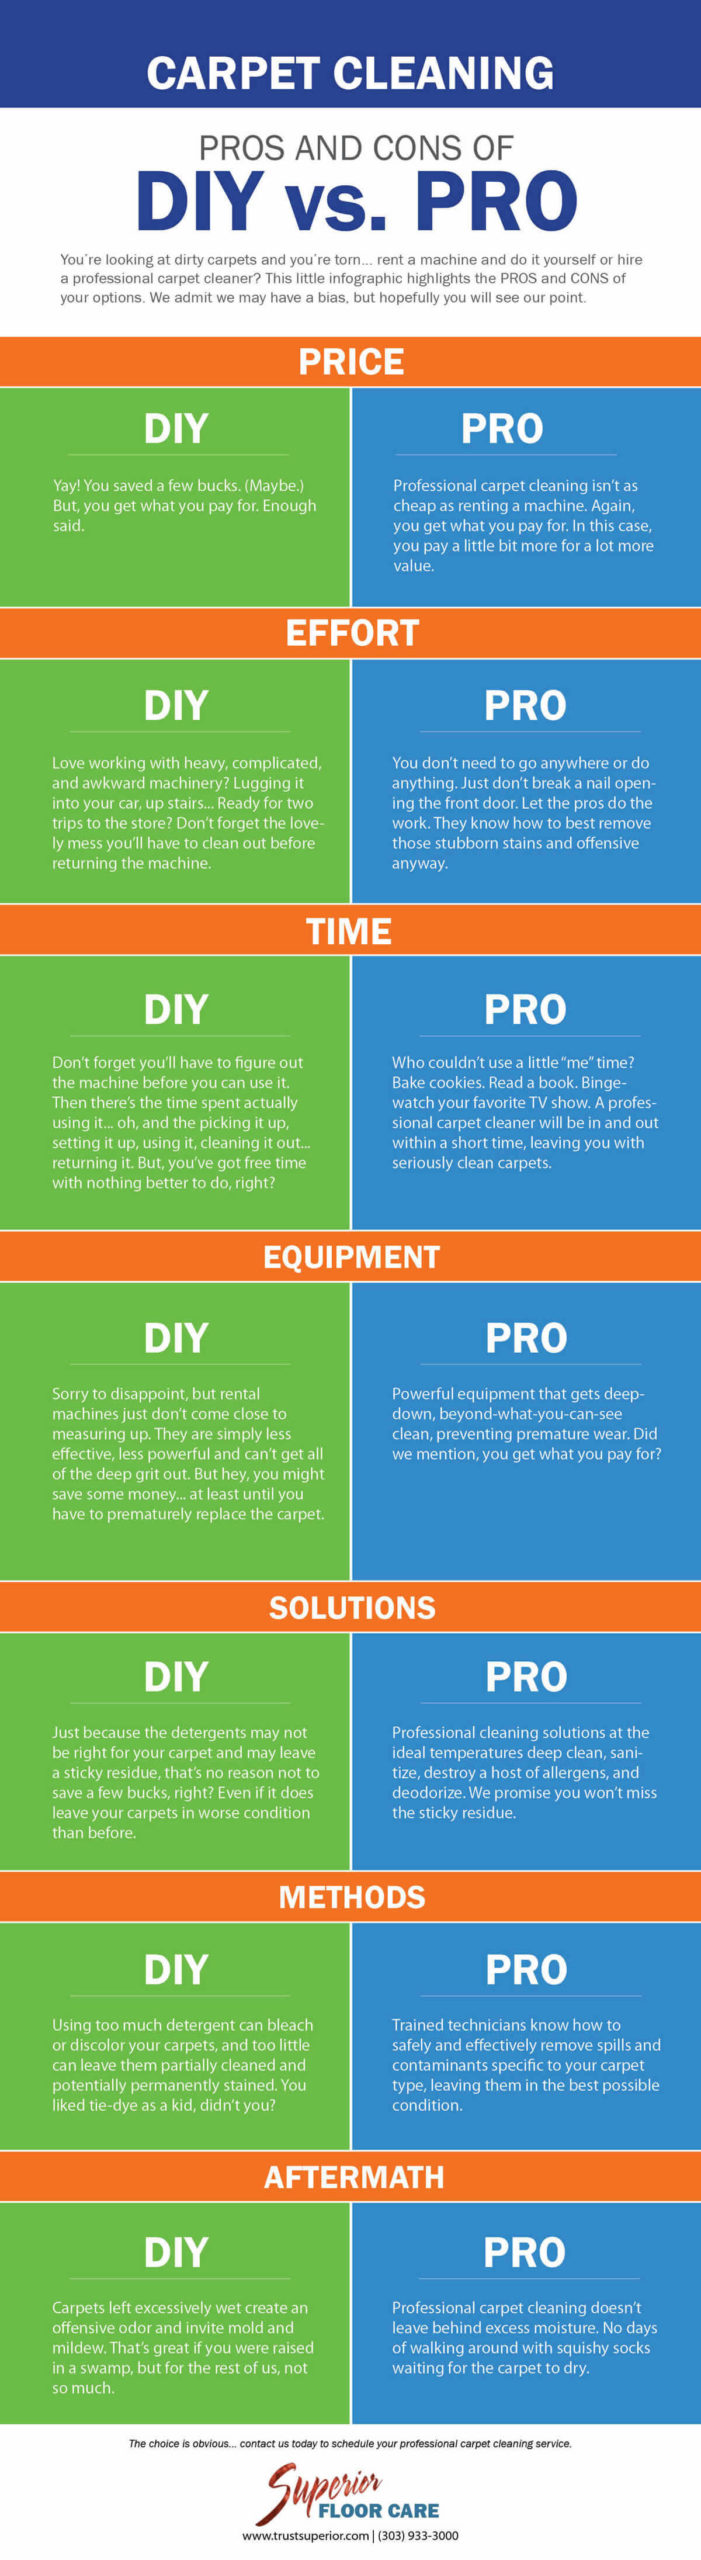 DIY Carpet Cleaning vs. Professional Carpet Cleaning